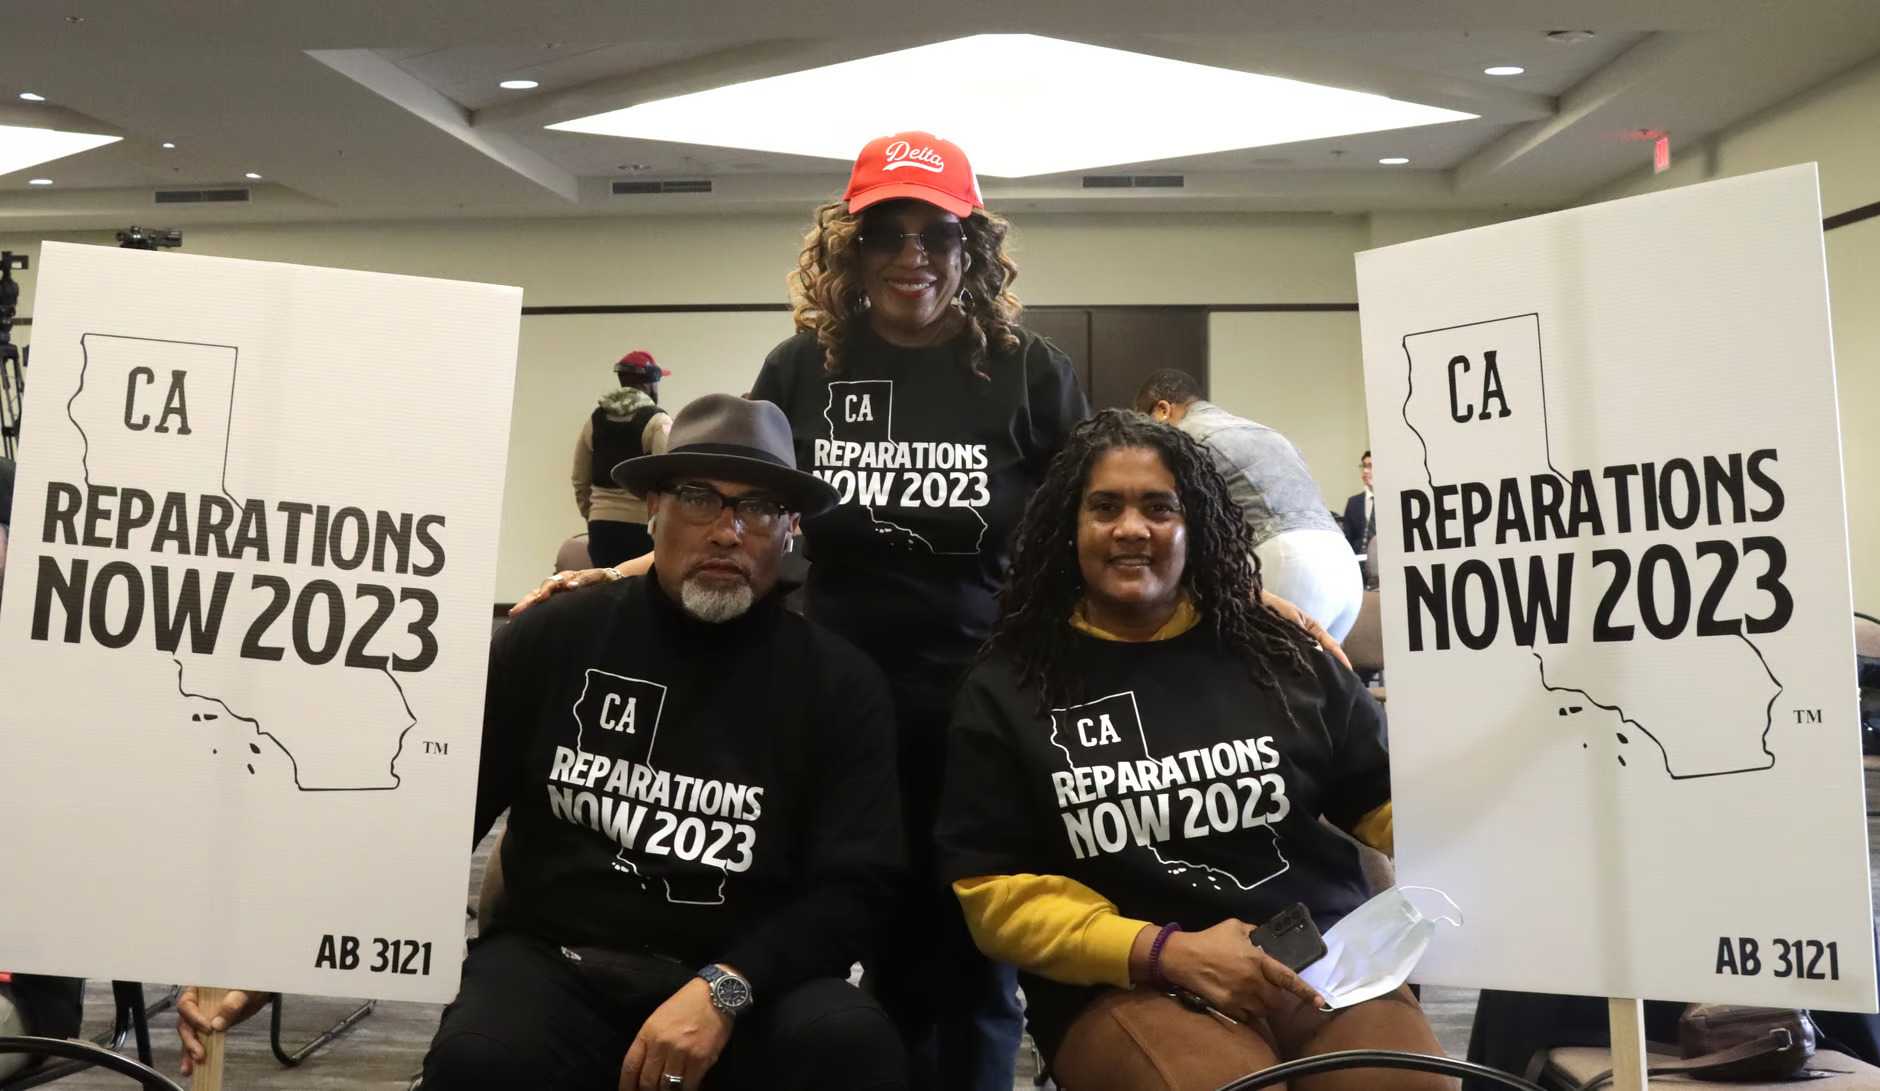 Three protestors pose for the a picture with their CA Reparations Now 2023 signs, shirts, and hat.